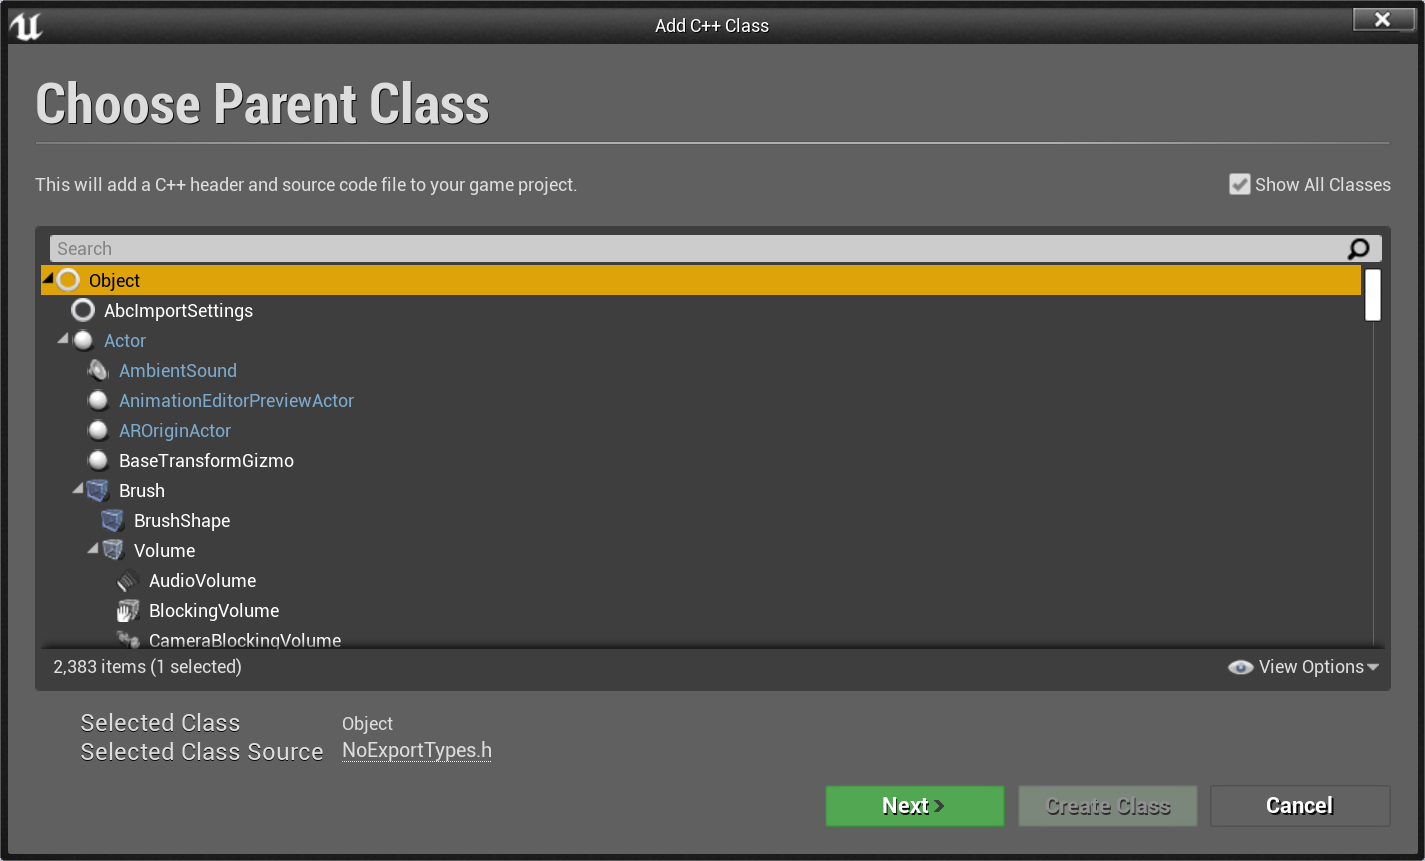 Screenshot of the Unreal Engine showing the new c++ class menu wizard